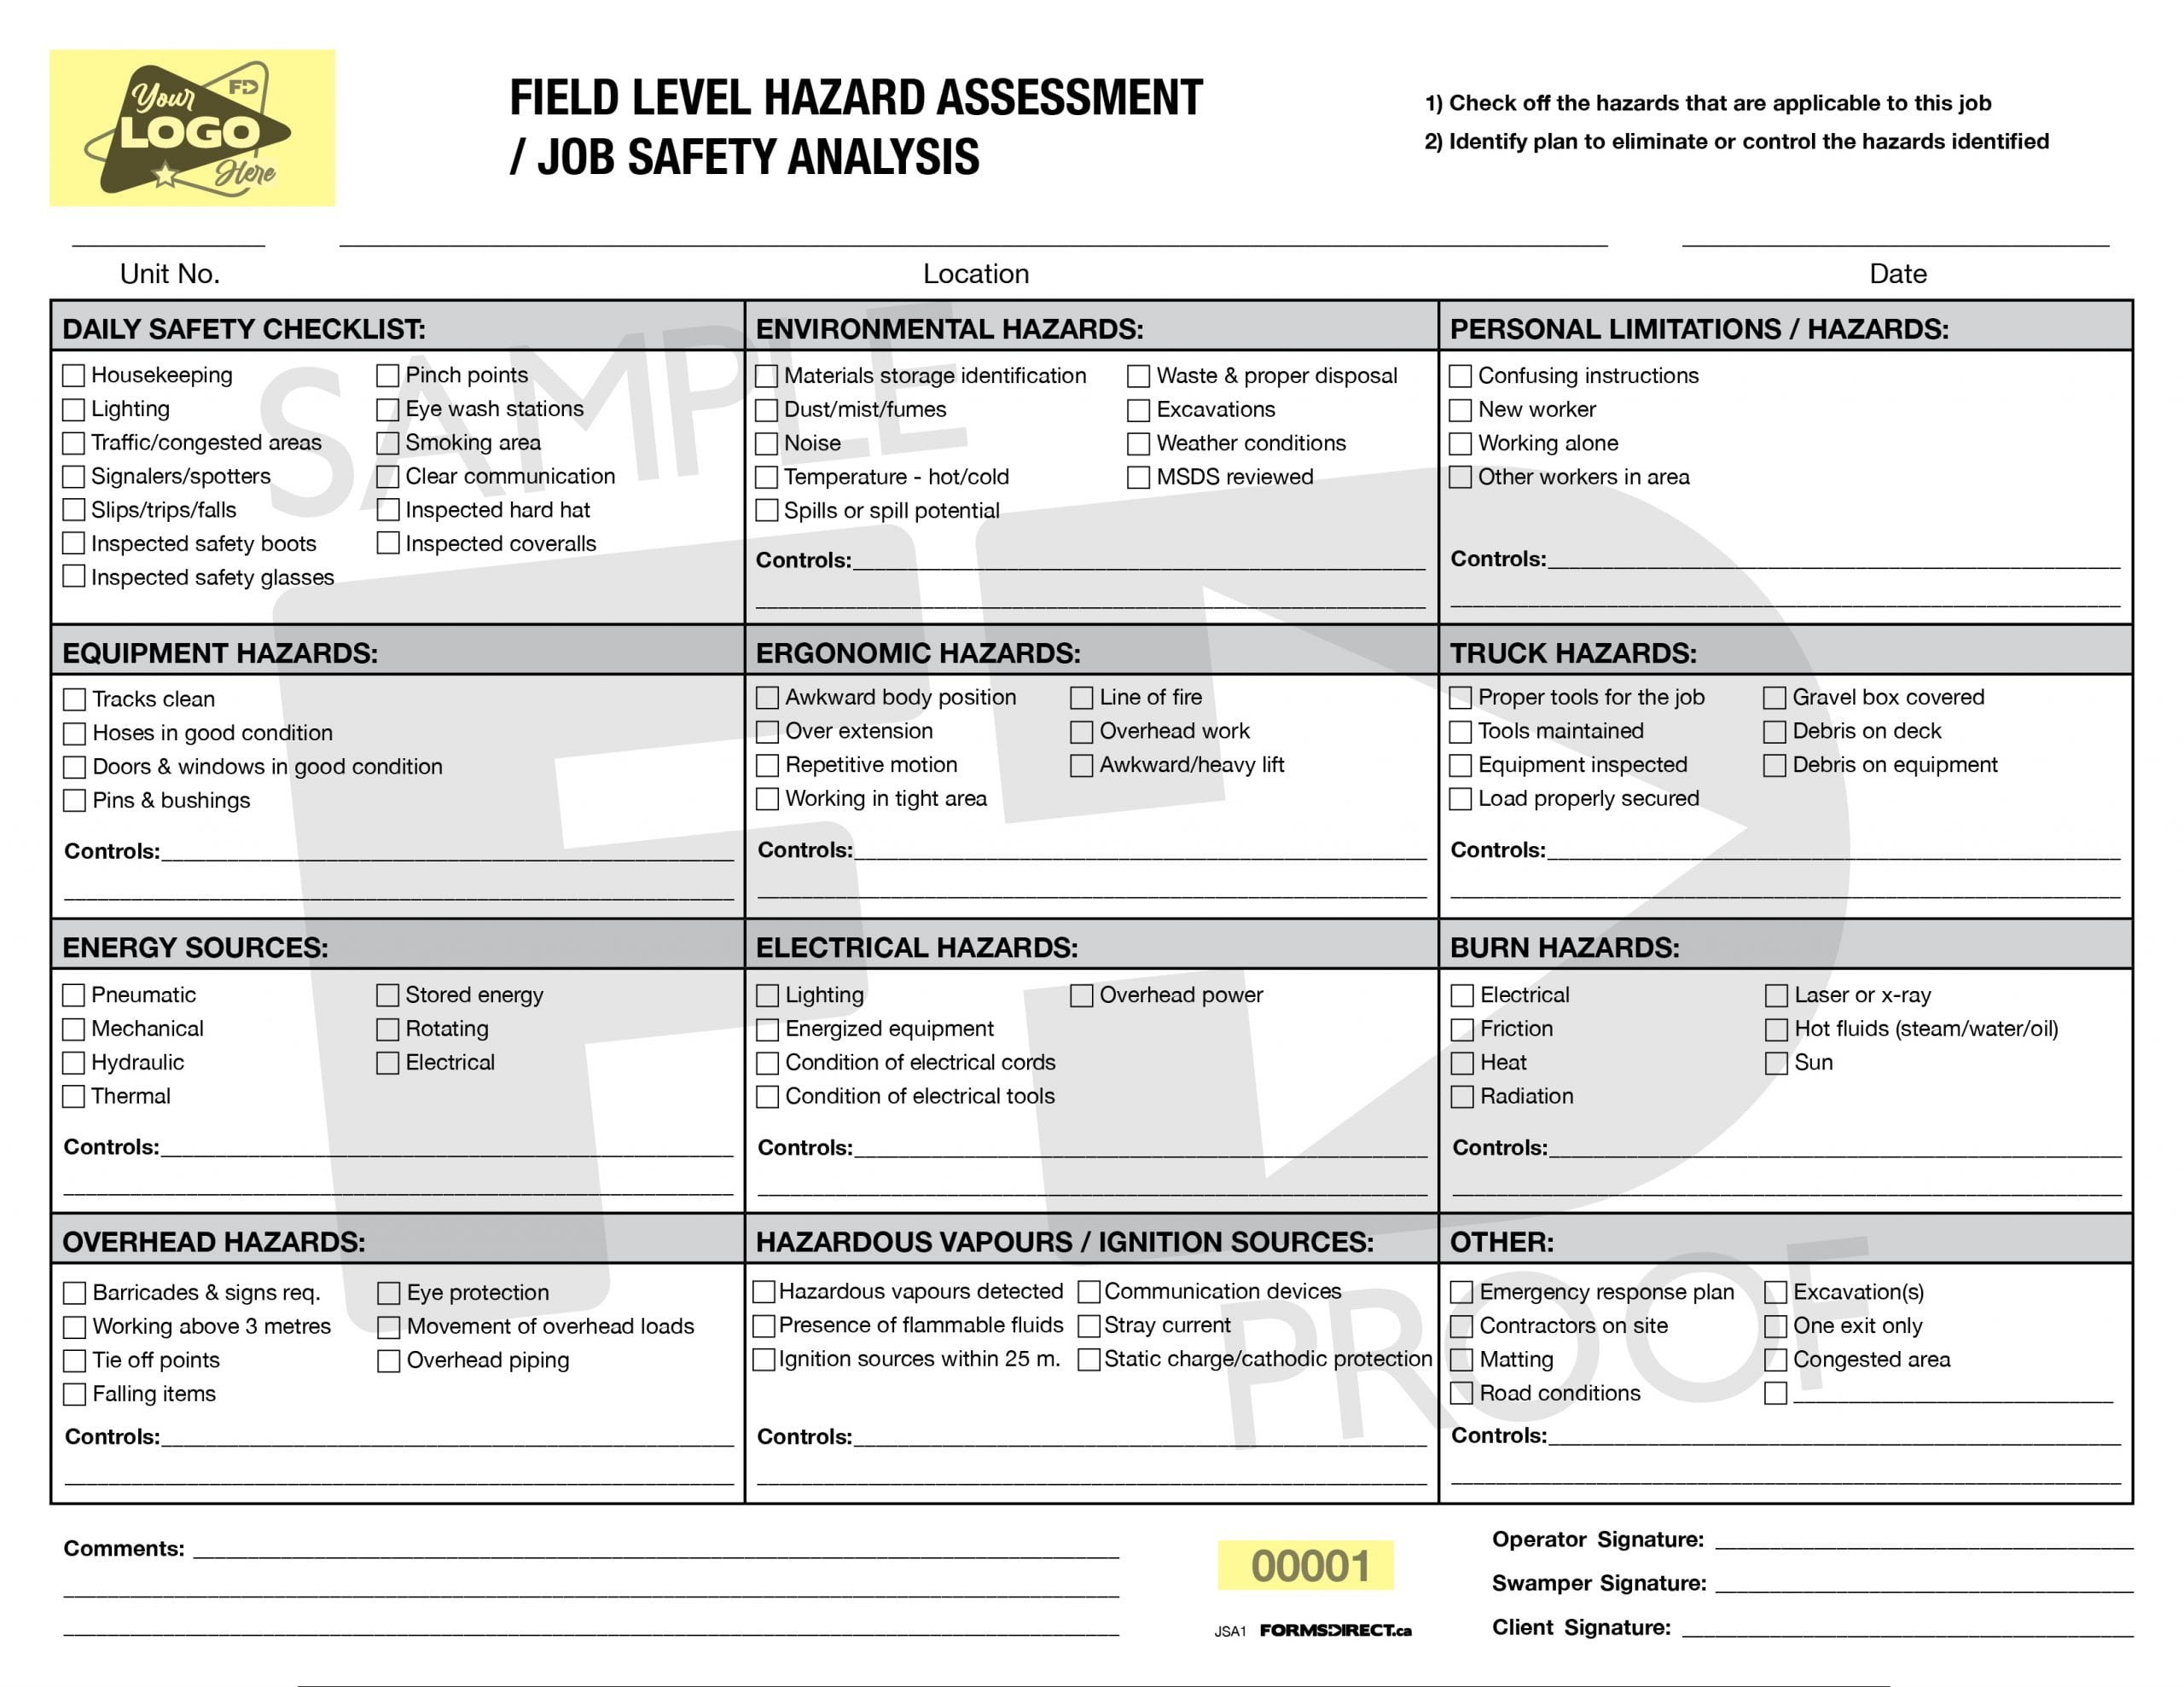 safety task assignment forms